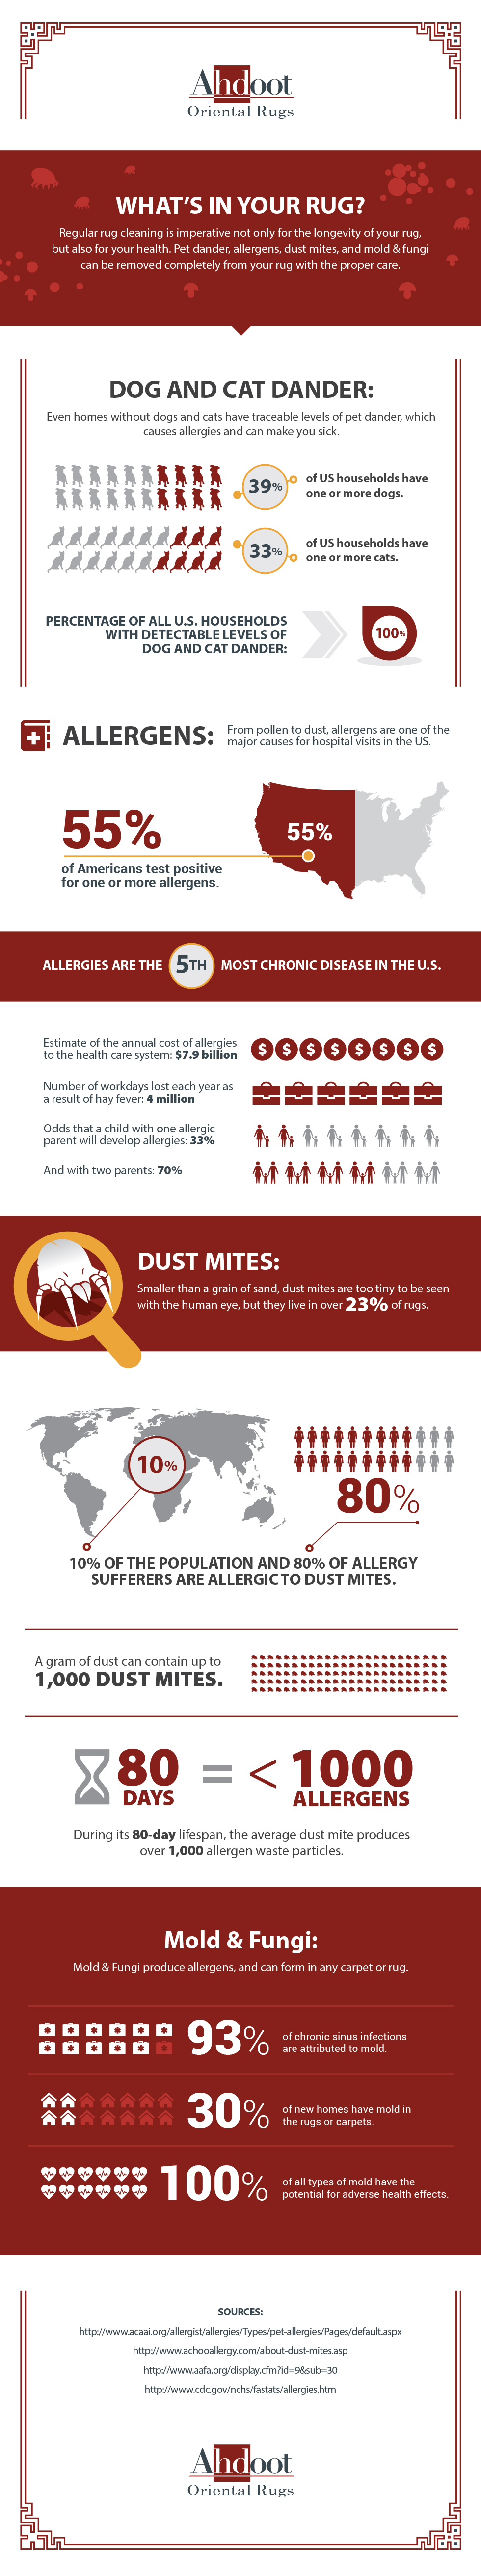 Ahdoot-infographic-Whats in Your Rug